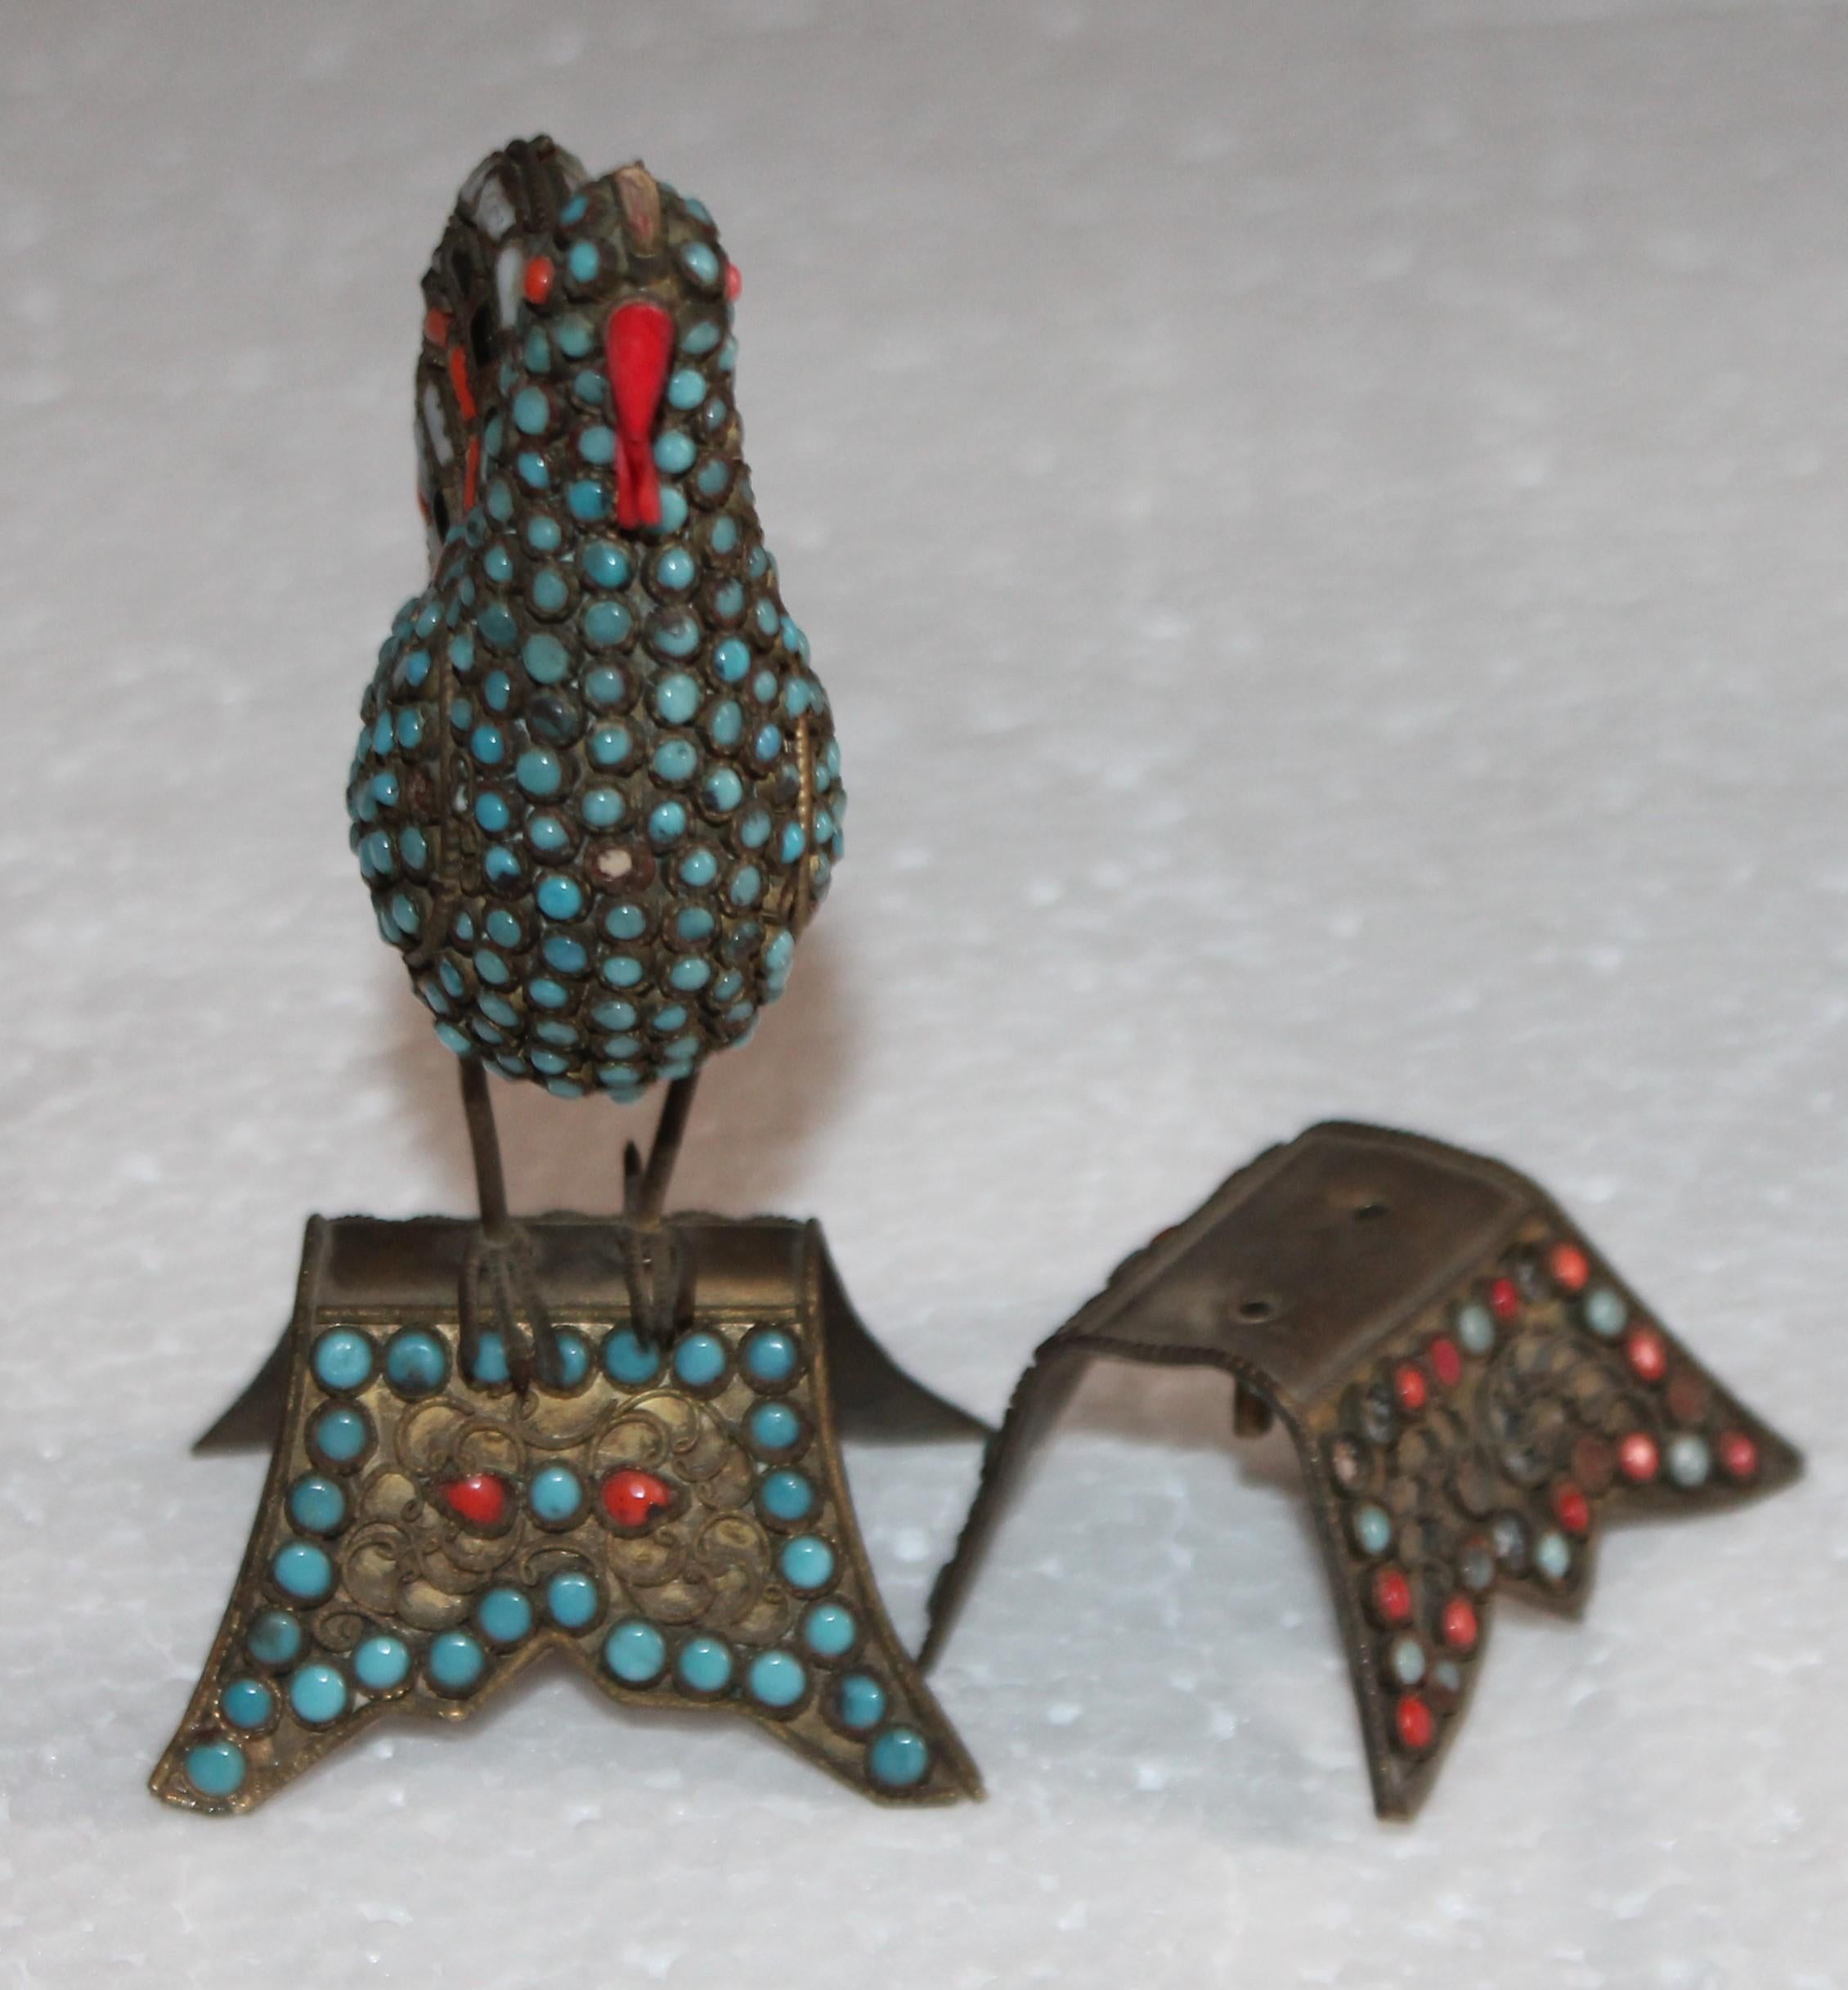 Hand-Crafted 19th Century Handmade Bird with Inlaid Turquoise and Coral Stones For Sale